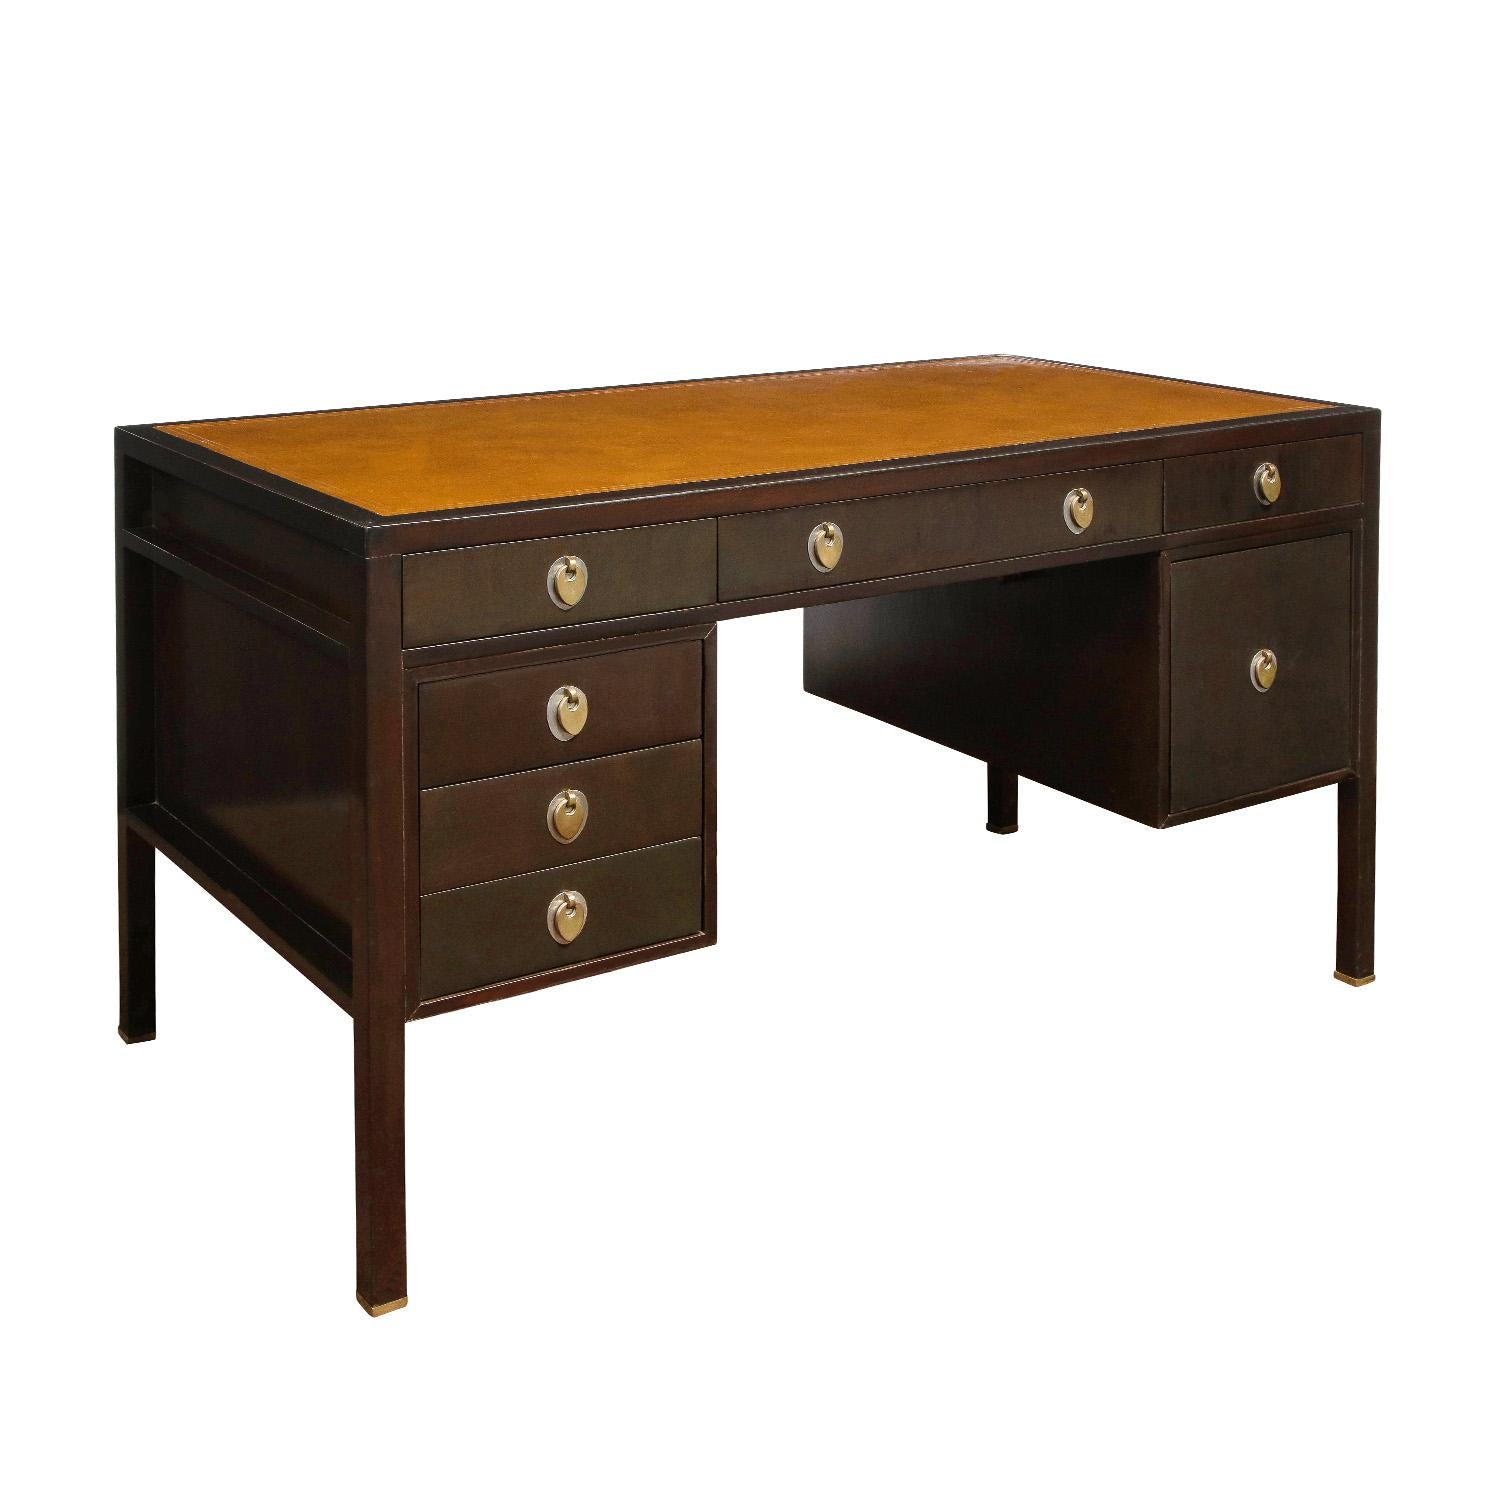 Beautifully crafted desk in dark mahogany with inset leather top and sculpted oval chrome and brass pulls as well as brass feet by Edward Wormley for Dunbar, American 1960's (signed with metal Dunbar label in drawer). The mixed metal pulls are a